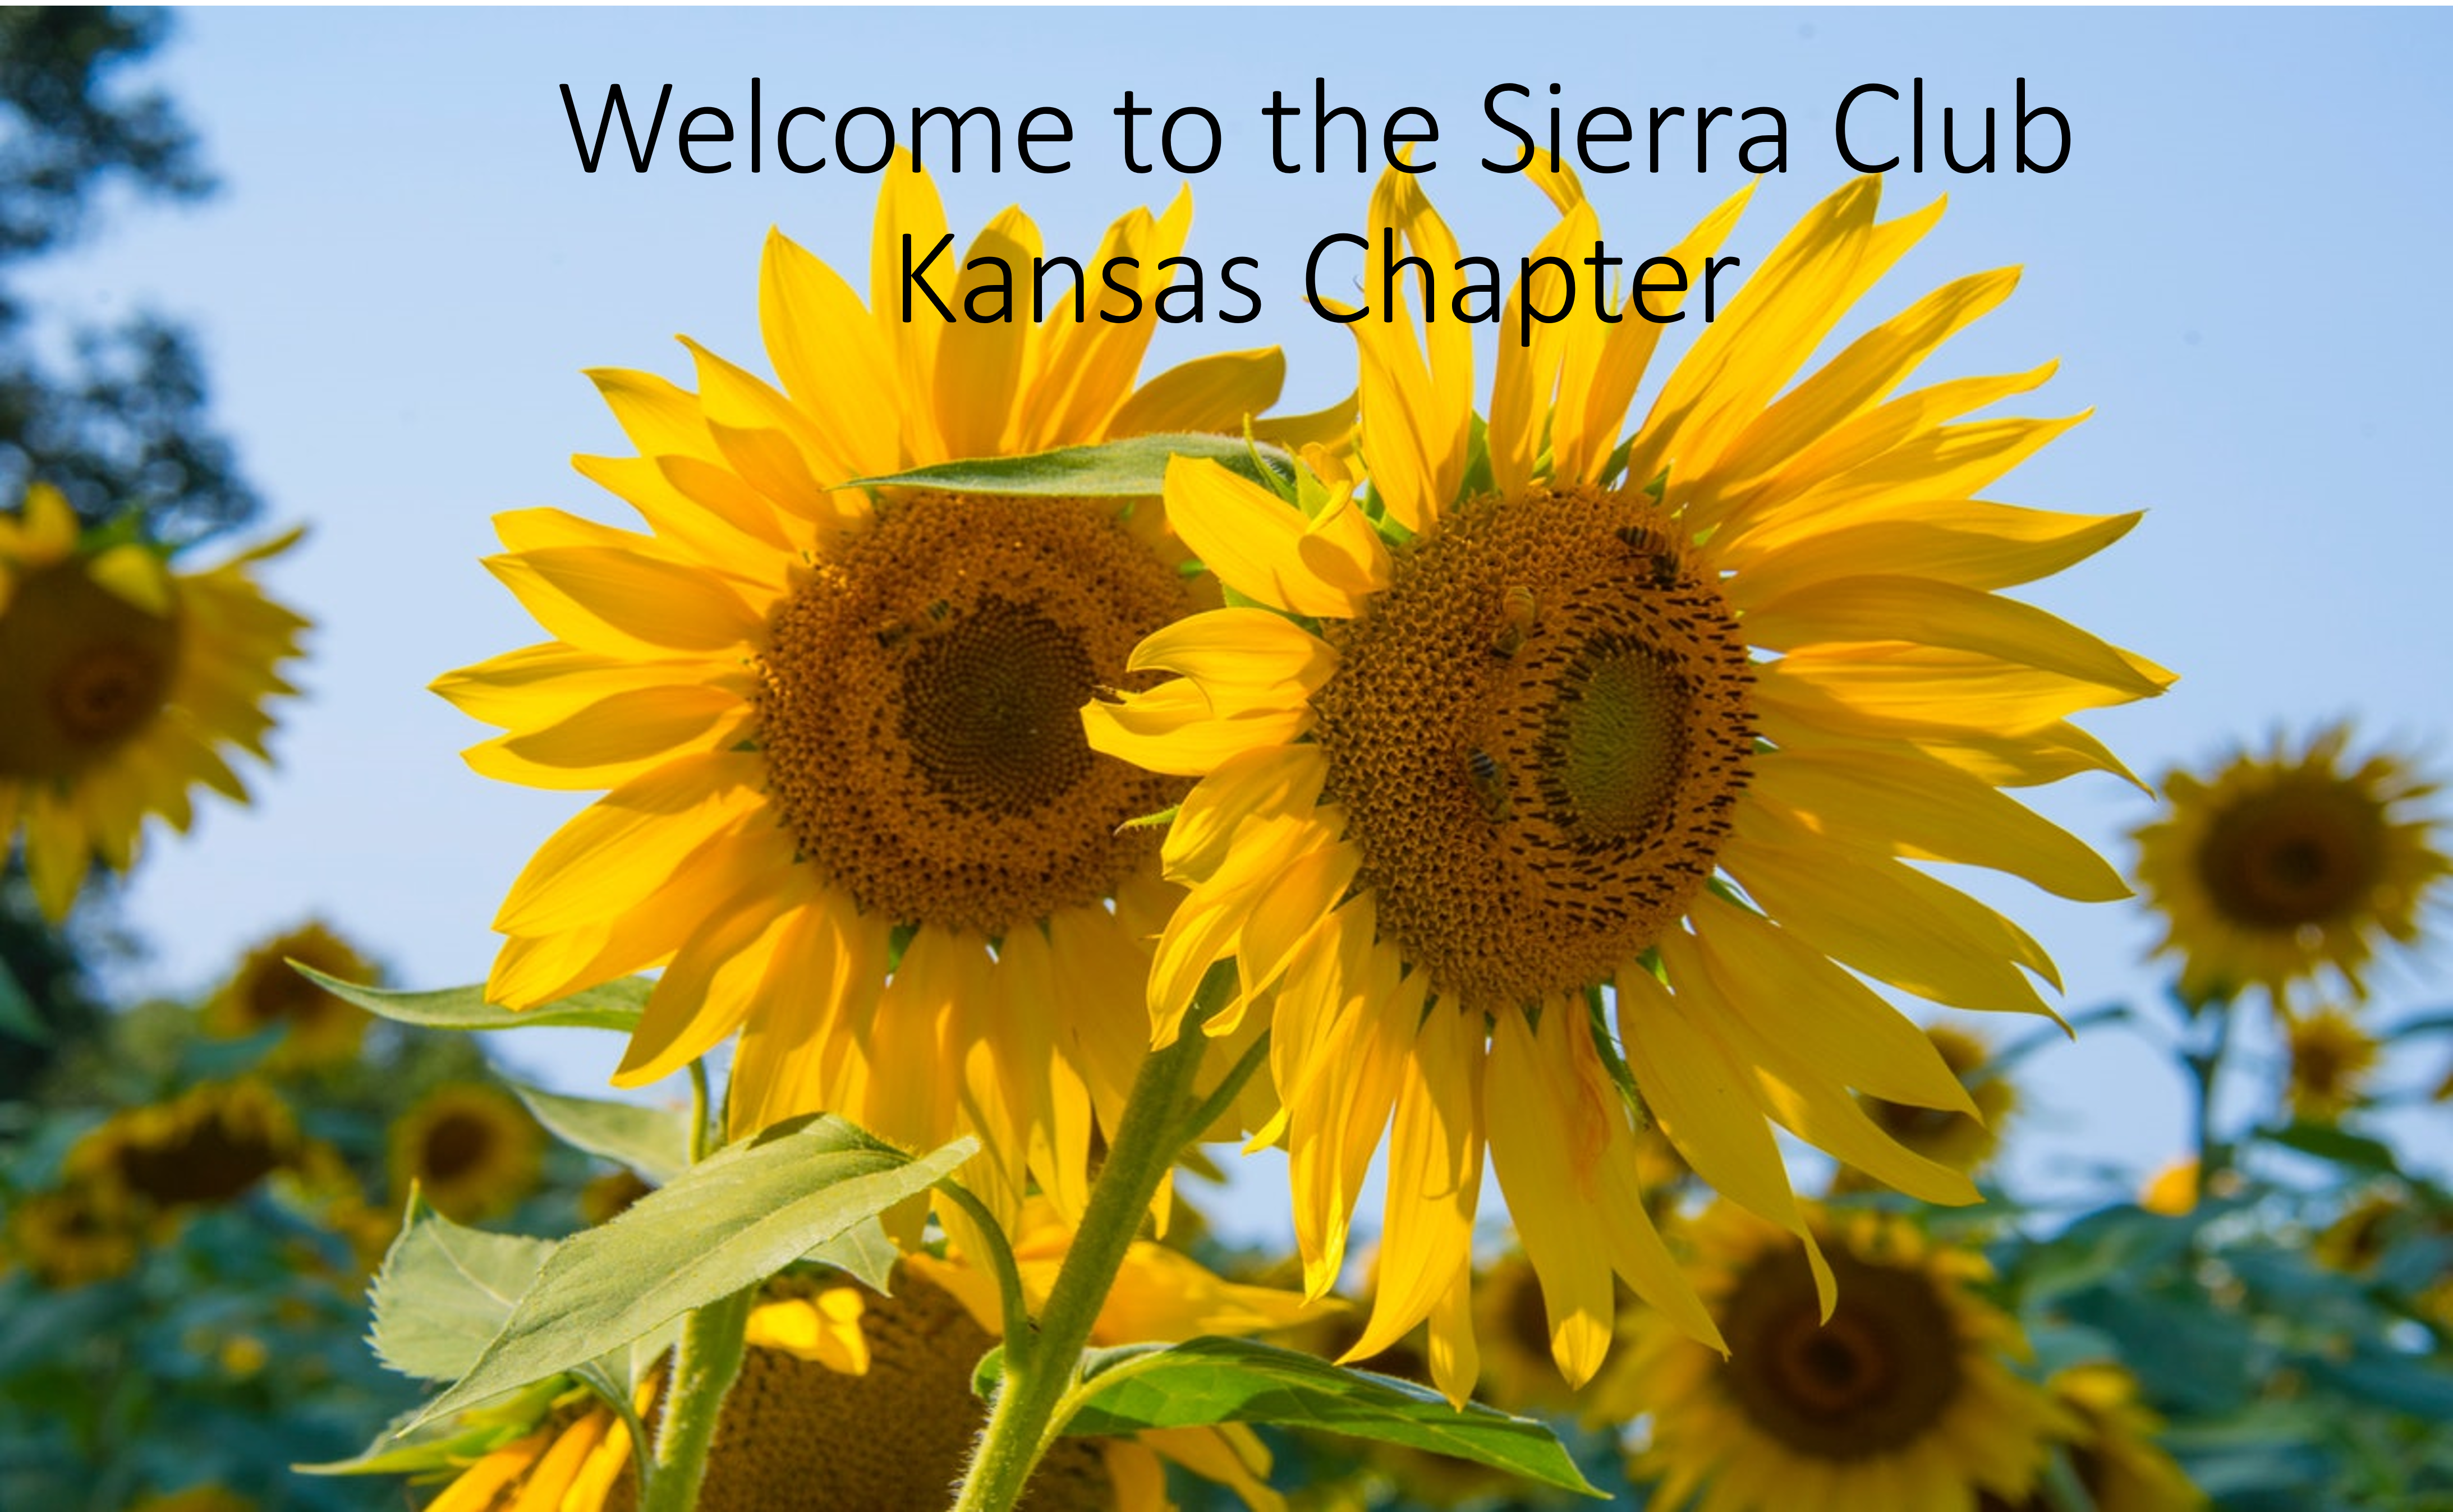 yellow sunflowers - welcome to SC KS Chapter